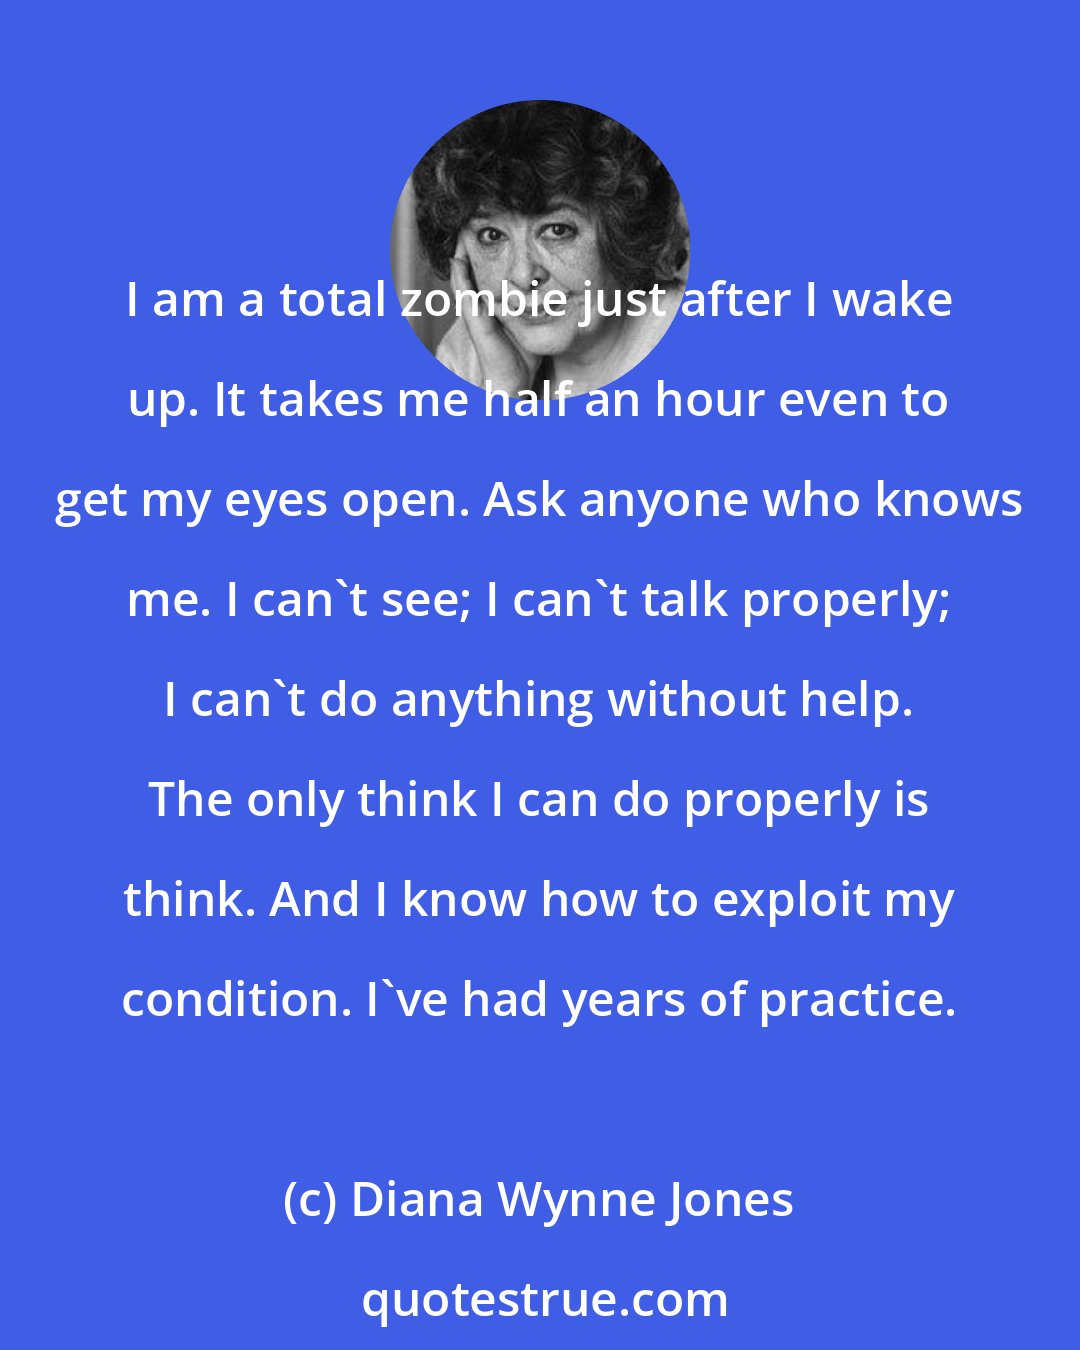 Diana Wynne Jones: I am a total zombie just after I wake up. It takes me half an hour even to get my eyes open. Ask anyone who knows me. I can't see; I can't talk properly; I can't do anything without help. The only think I can do properly is think. And I know how to exploit my condition. I've had years of practice.